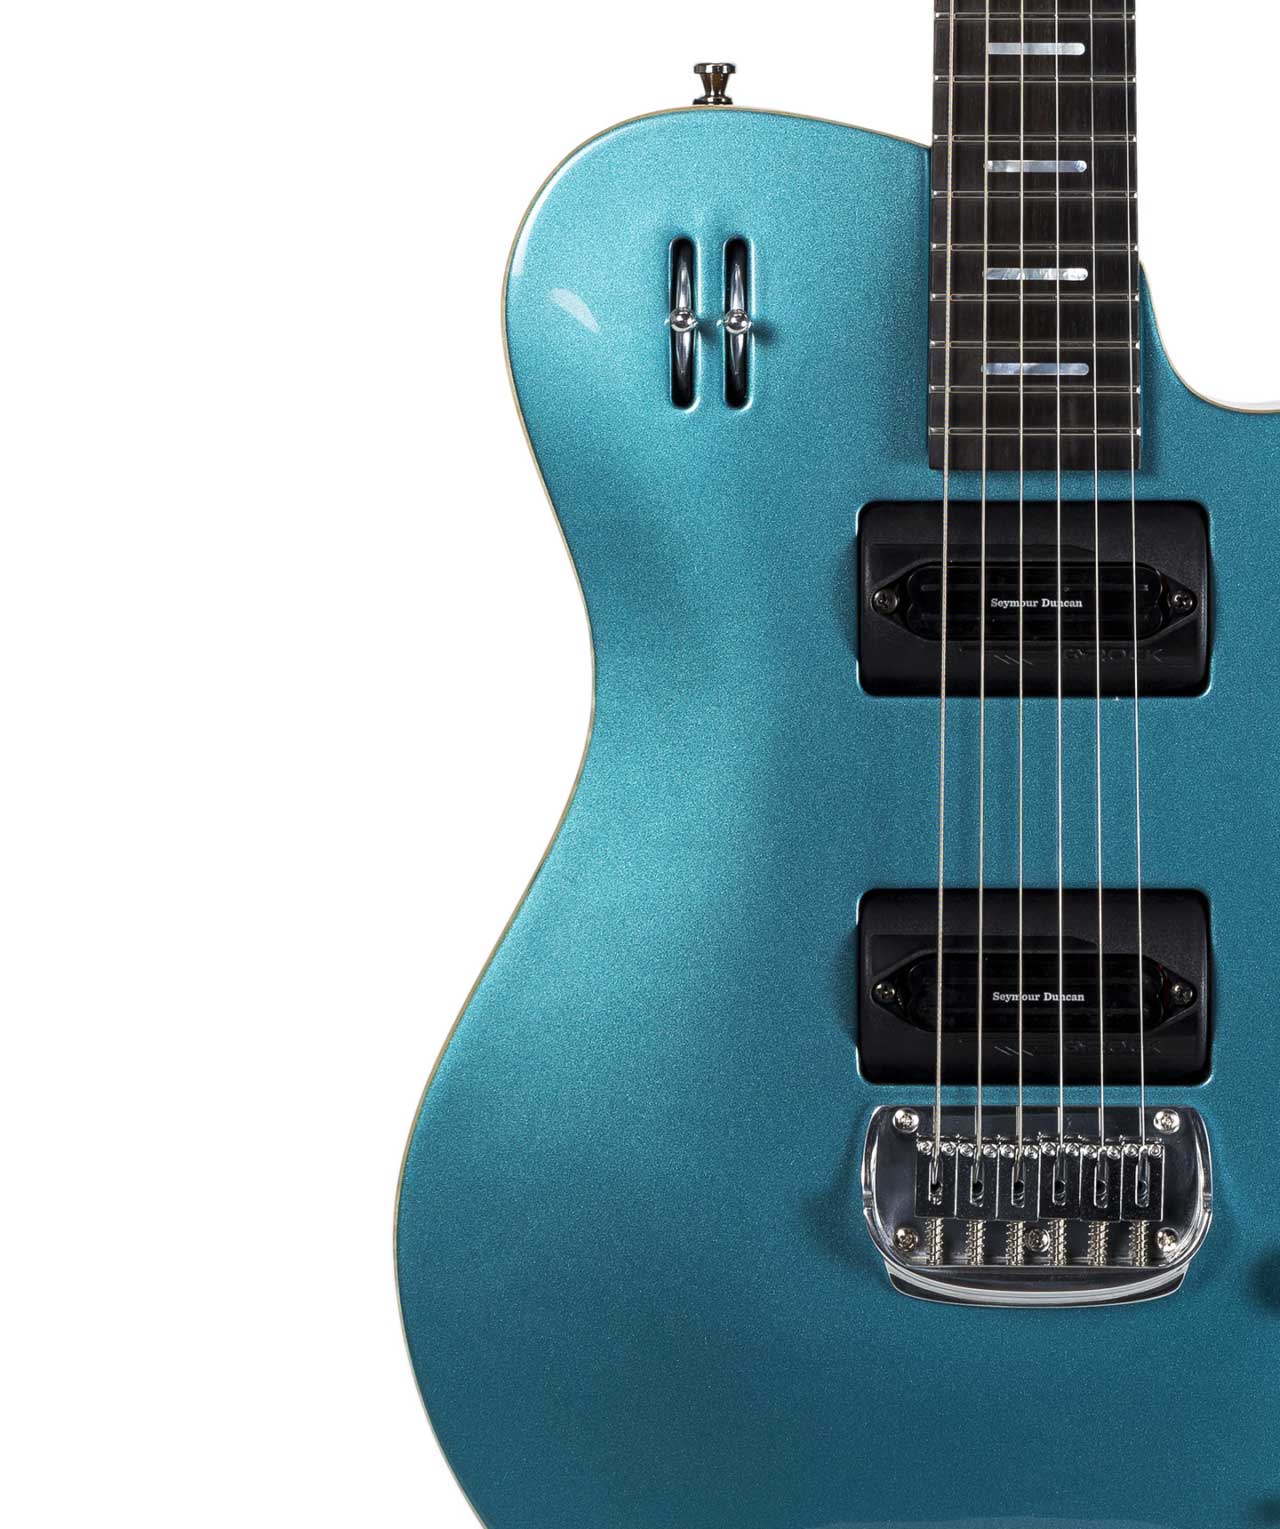 Gyrock Guitars joined Luthiers.com